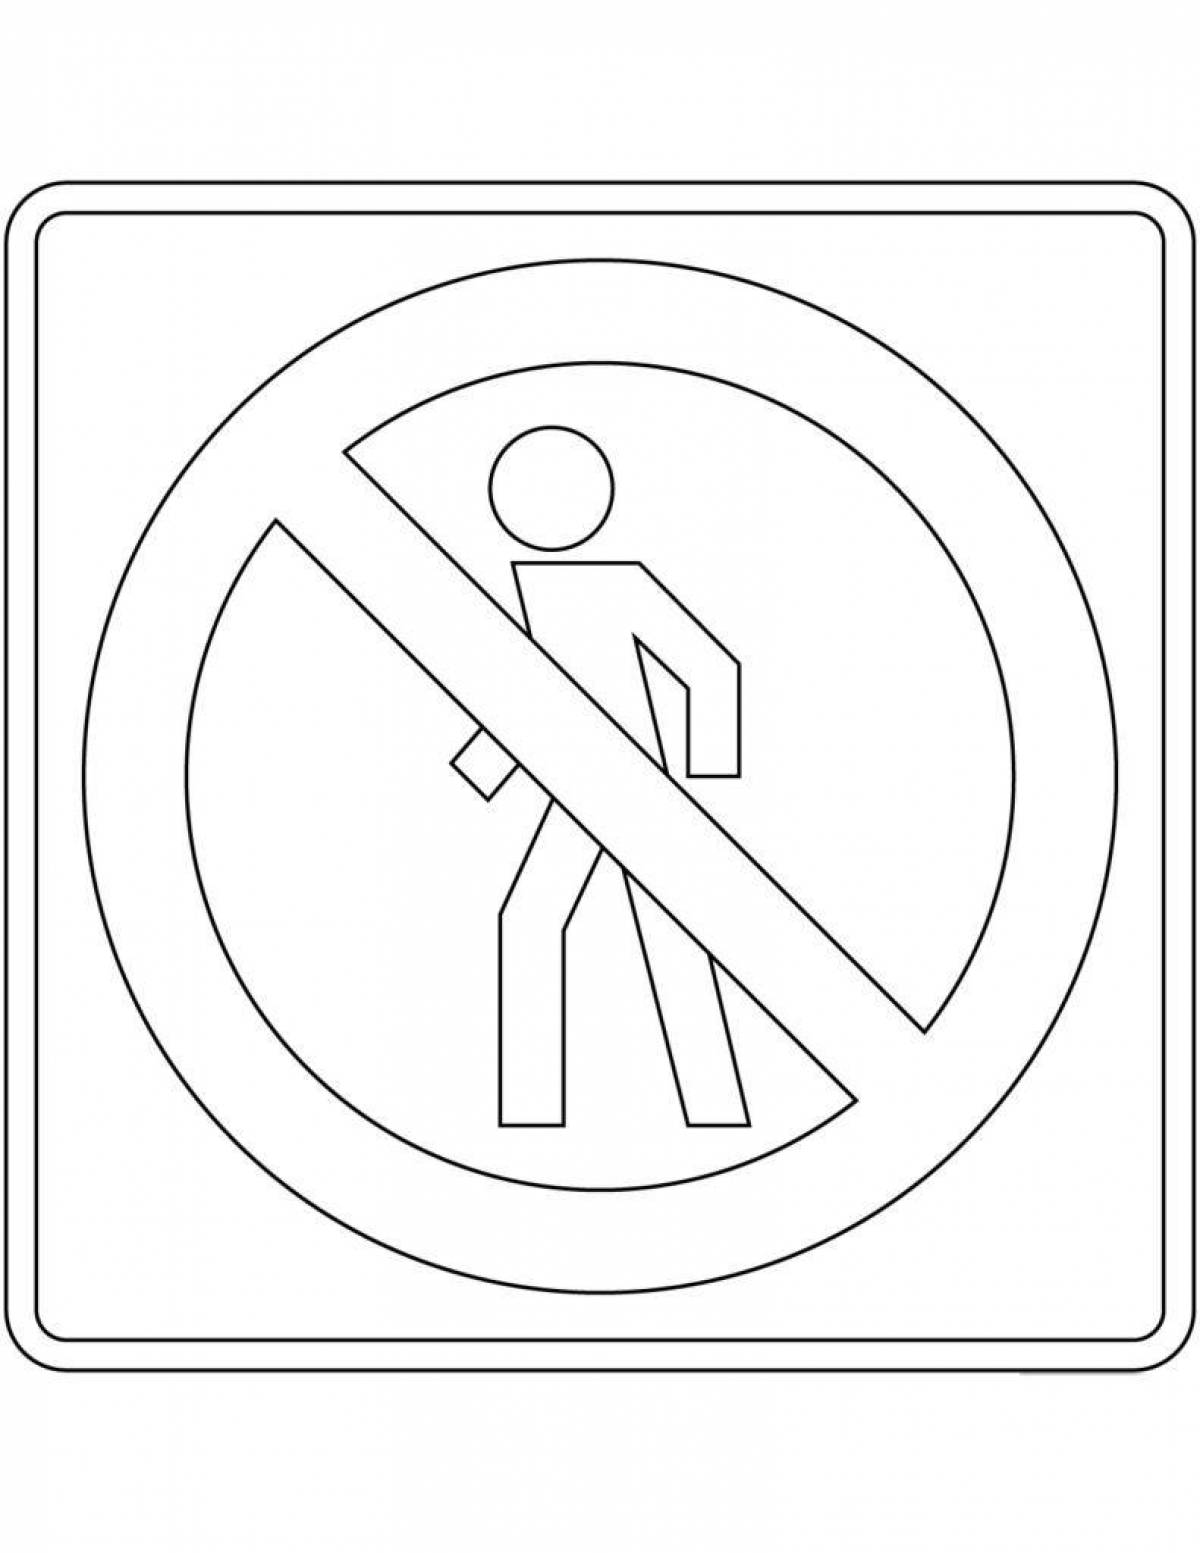 Funny road signs coloring page for kids